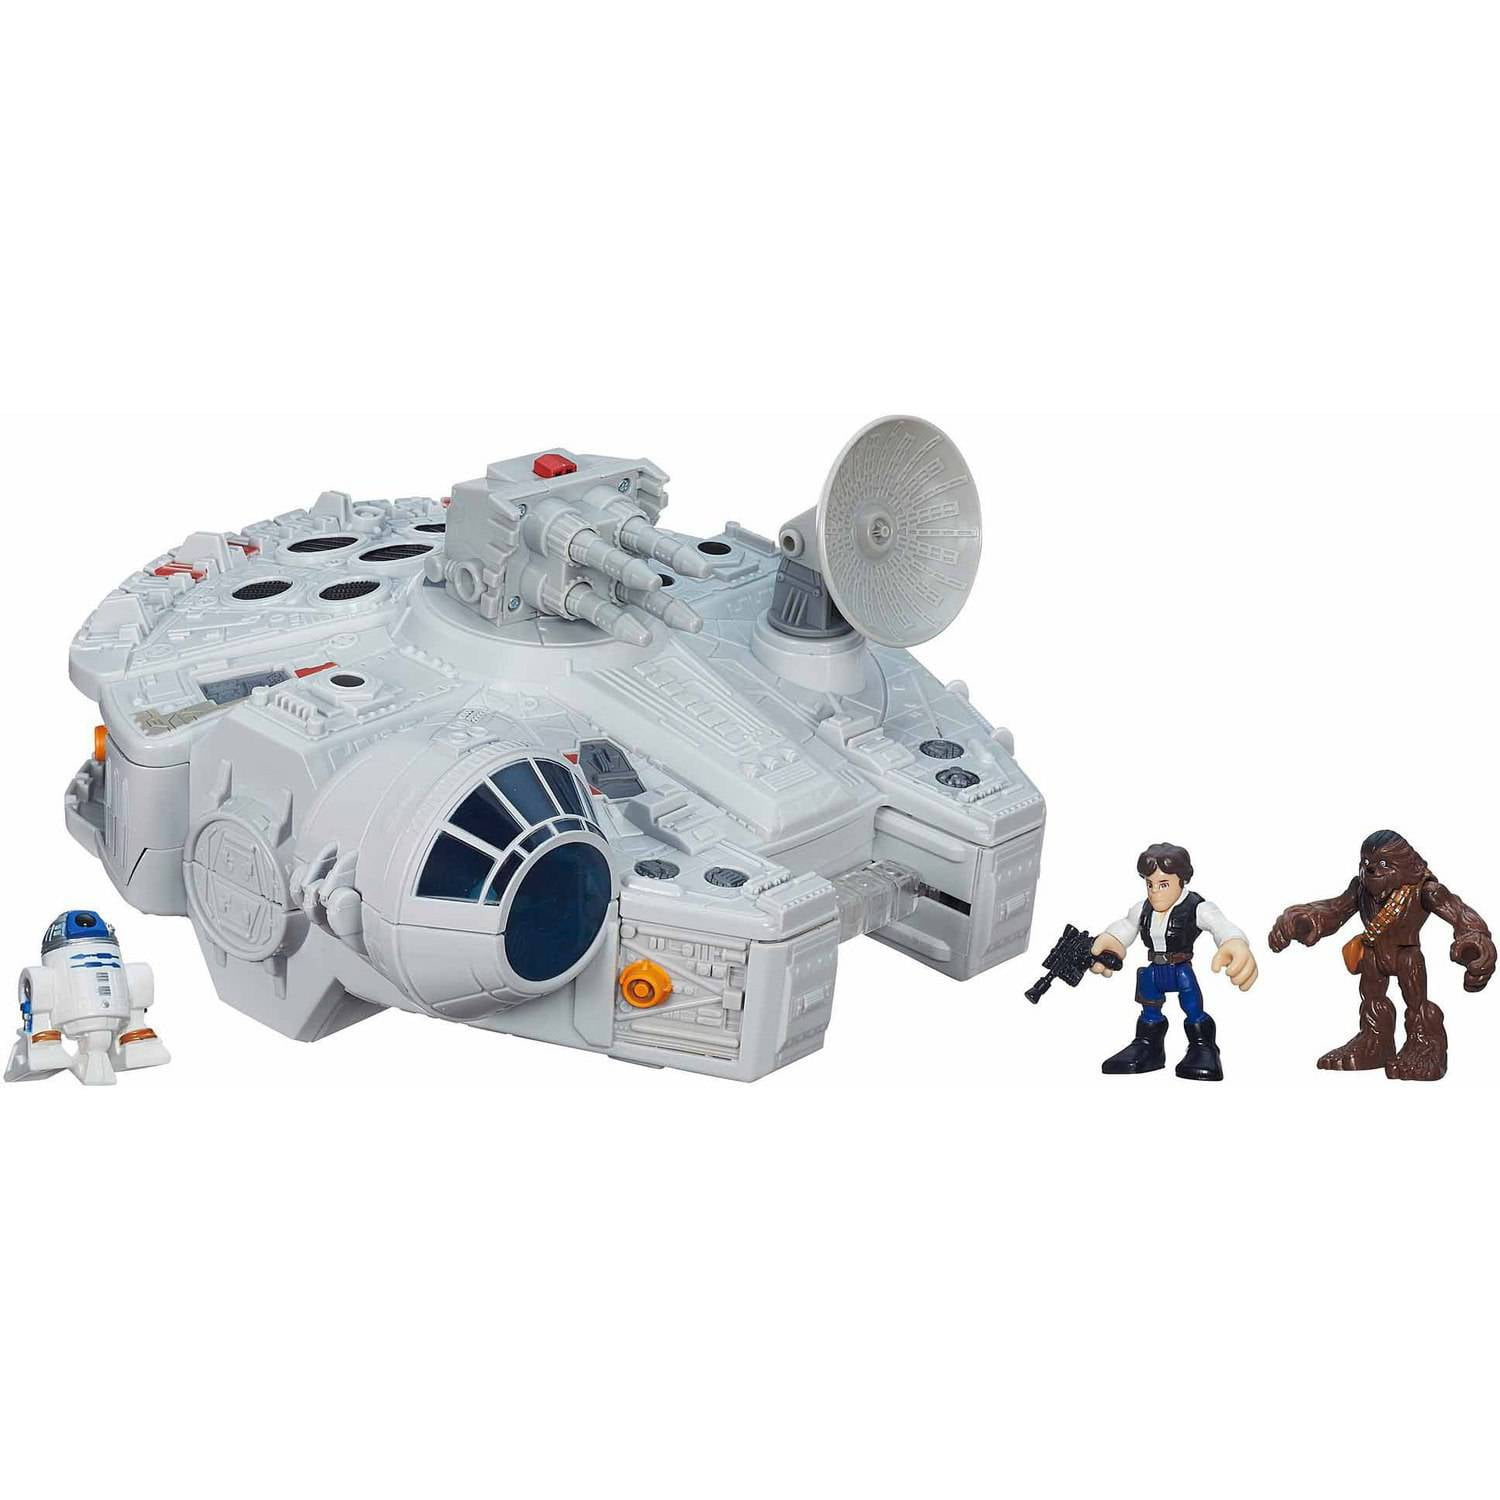 Hasbro Star Wars Playskool Heroes Jedi Force Millennium Falcon With Han Solo Chewbacca Playset Action Figure for sale online 